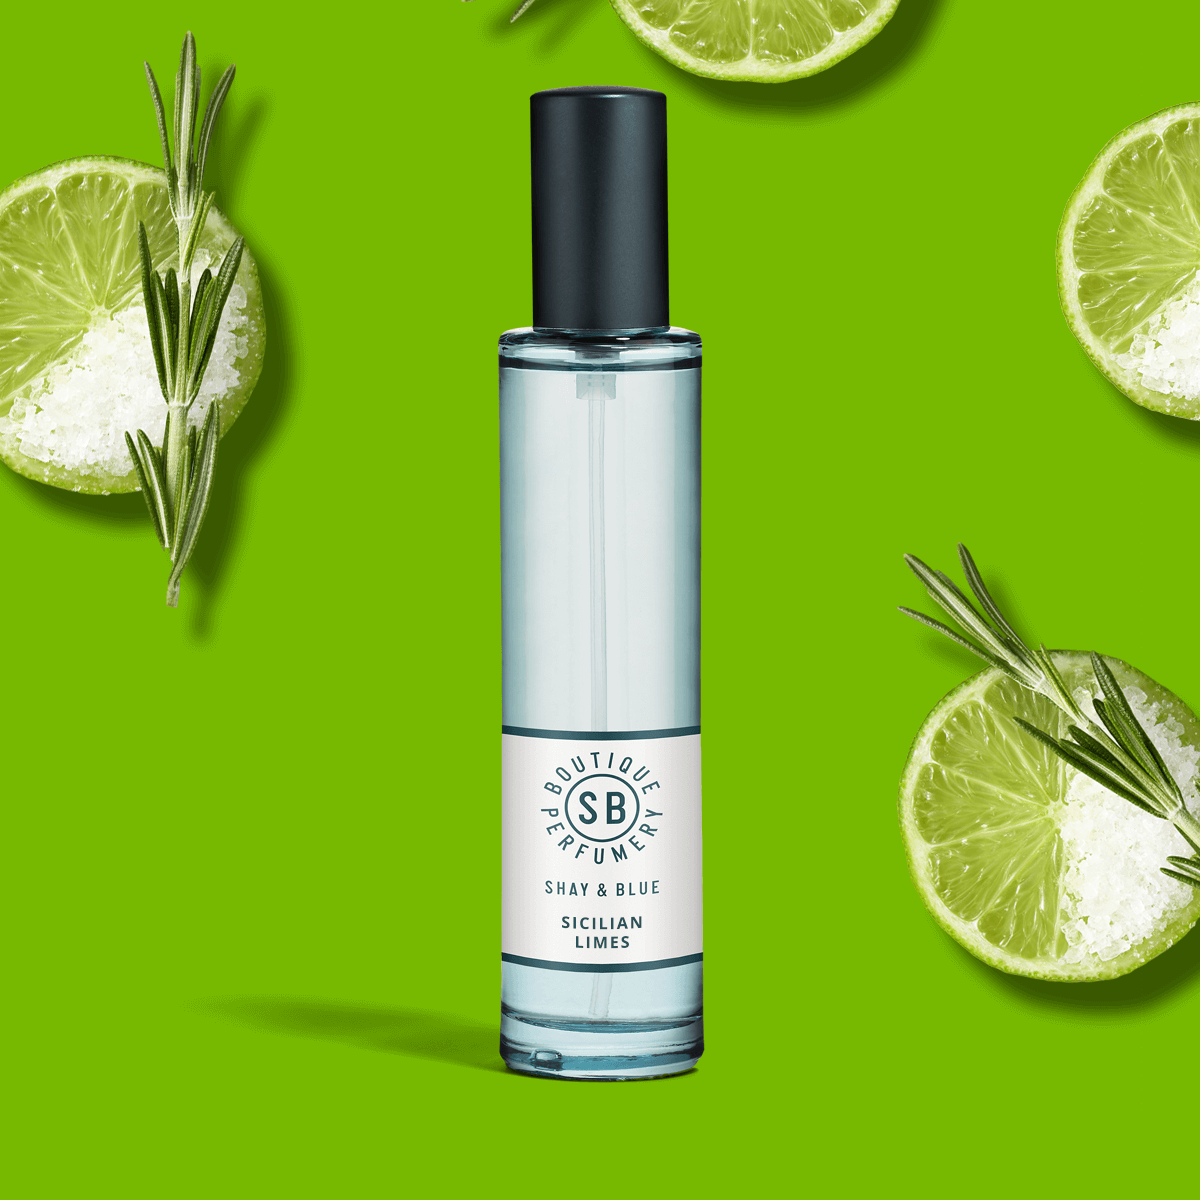 Sicilian Limes Fragrance 30ml | Tangy limes with a happy-hour hit of a salty margarita, rosemary and moss | Clean All Gender Fragrance | Shay & Blue